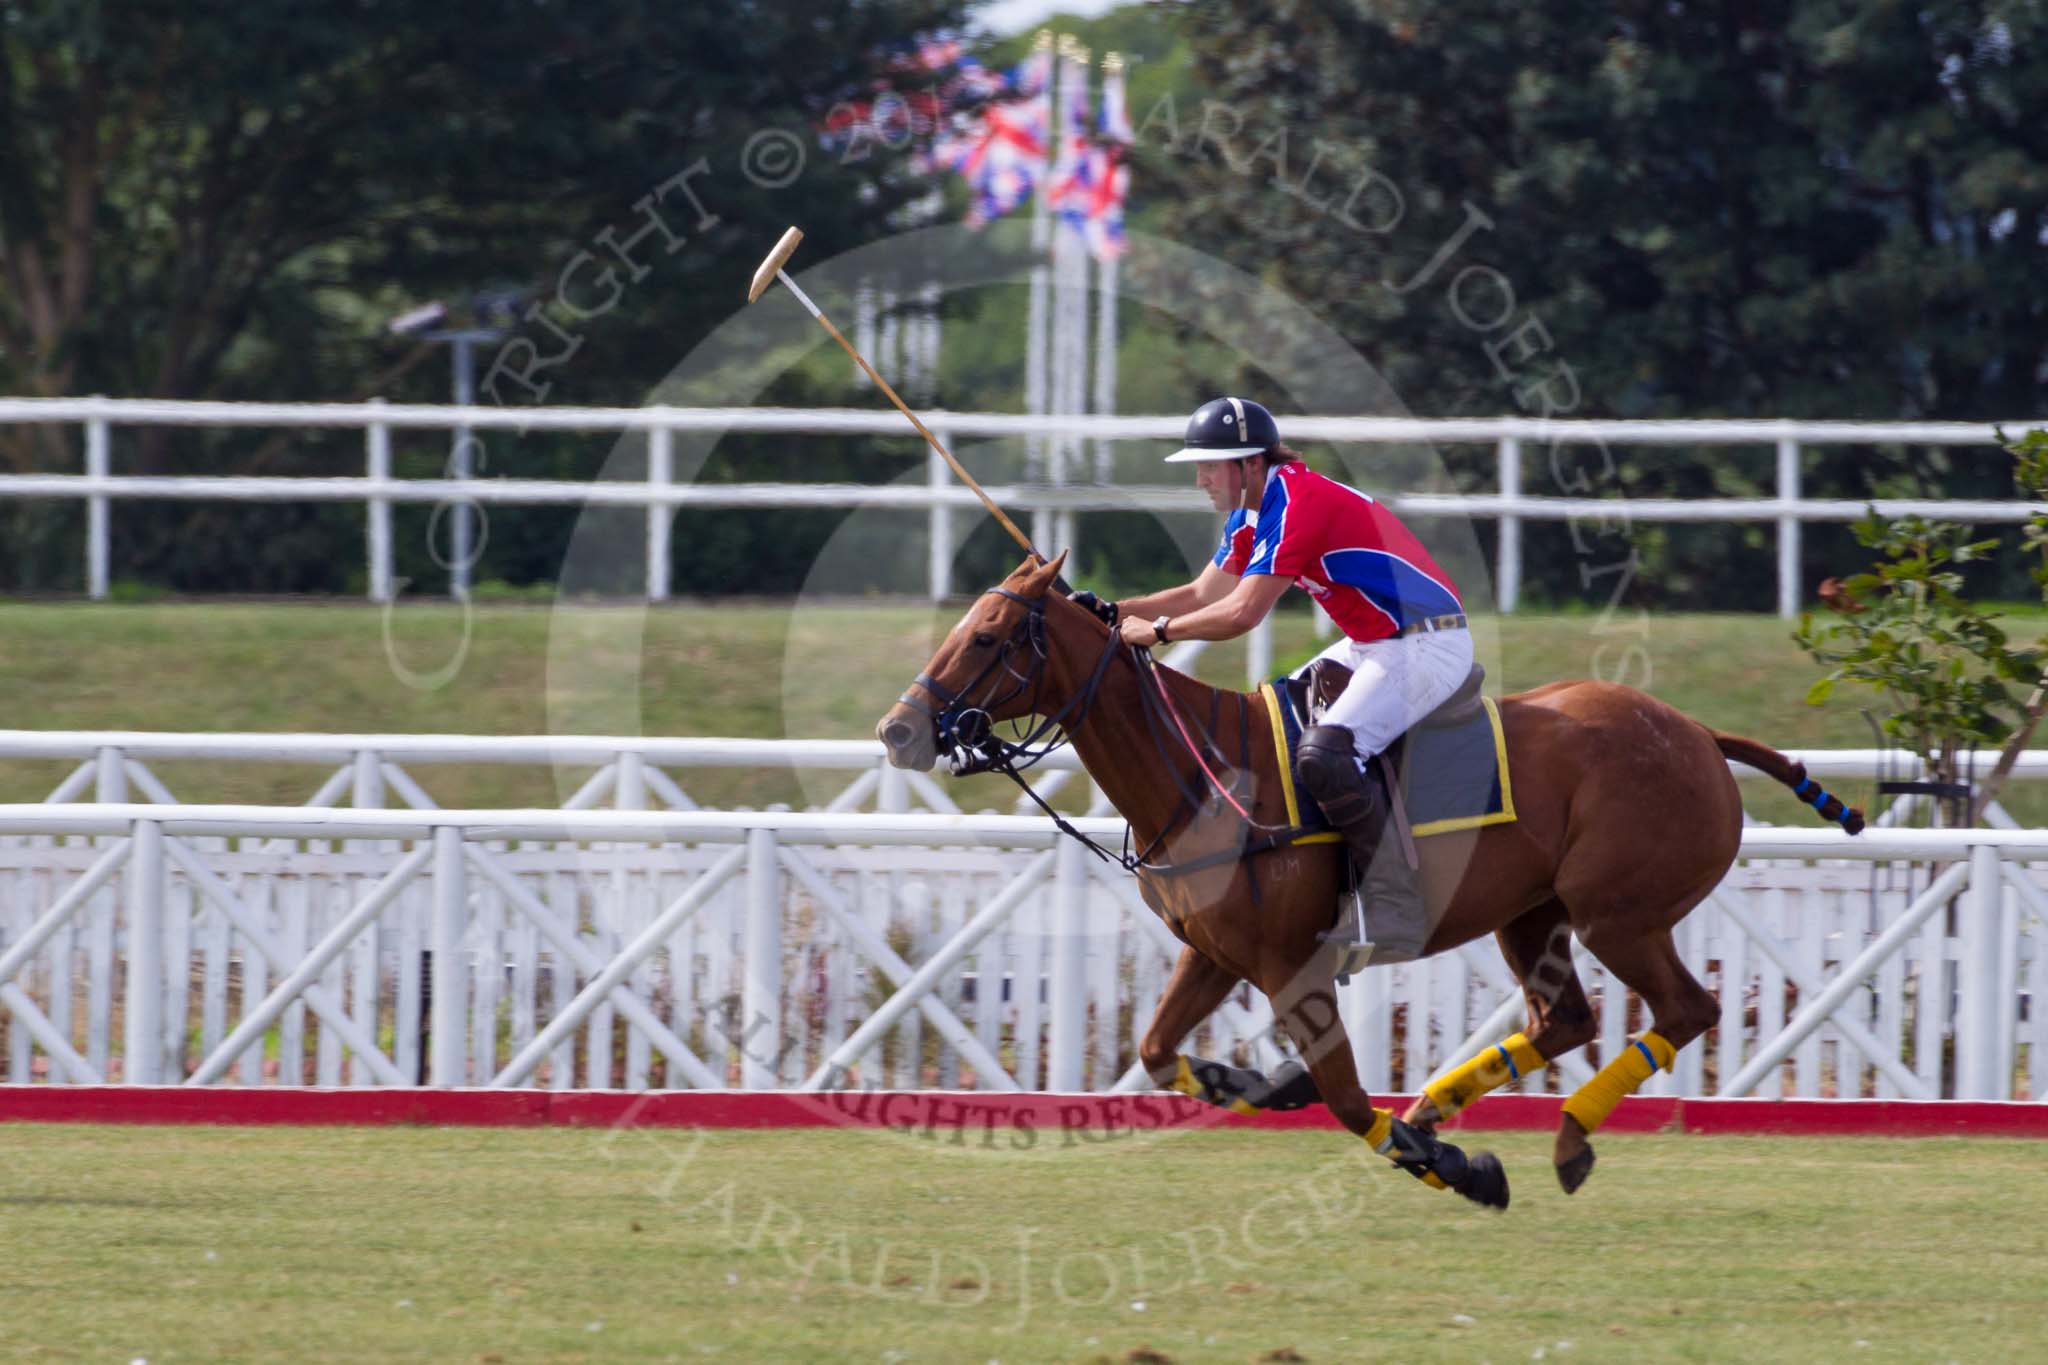 DBPC Polo in the Park 2013.
Dallas Burston Polo Club, ,
Southam,
Warwickshire,
United Kingdom,
on 01 September 2013 at 14:19, image #390